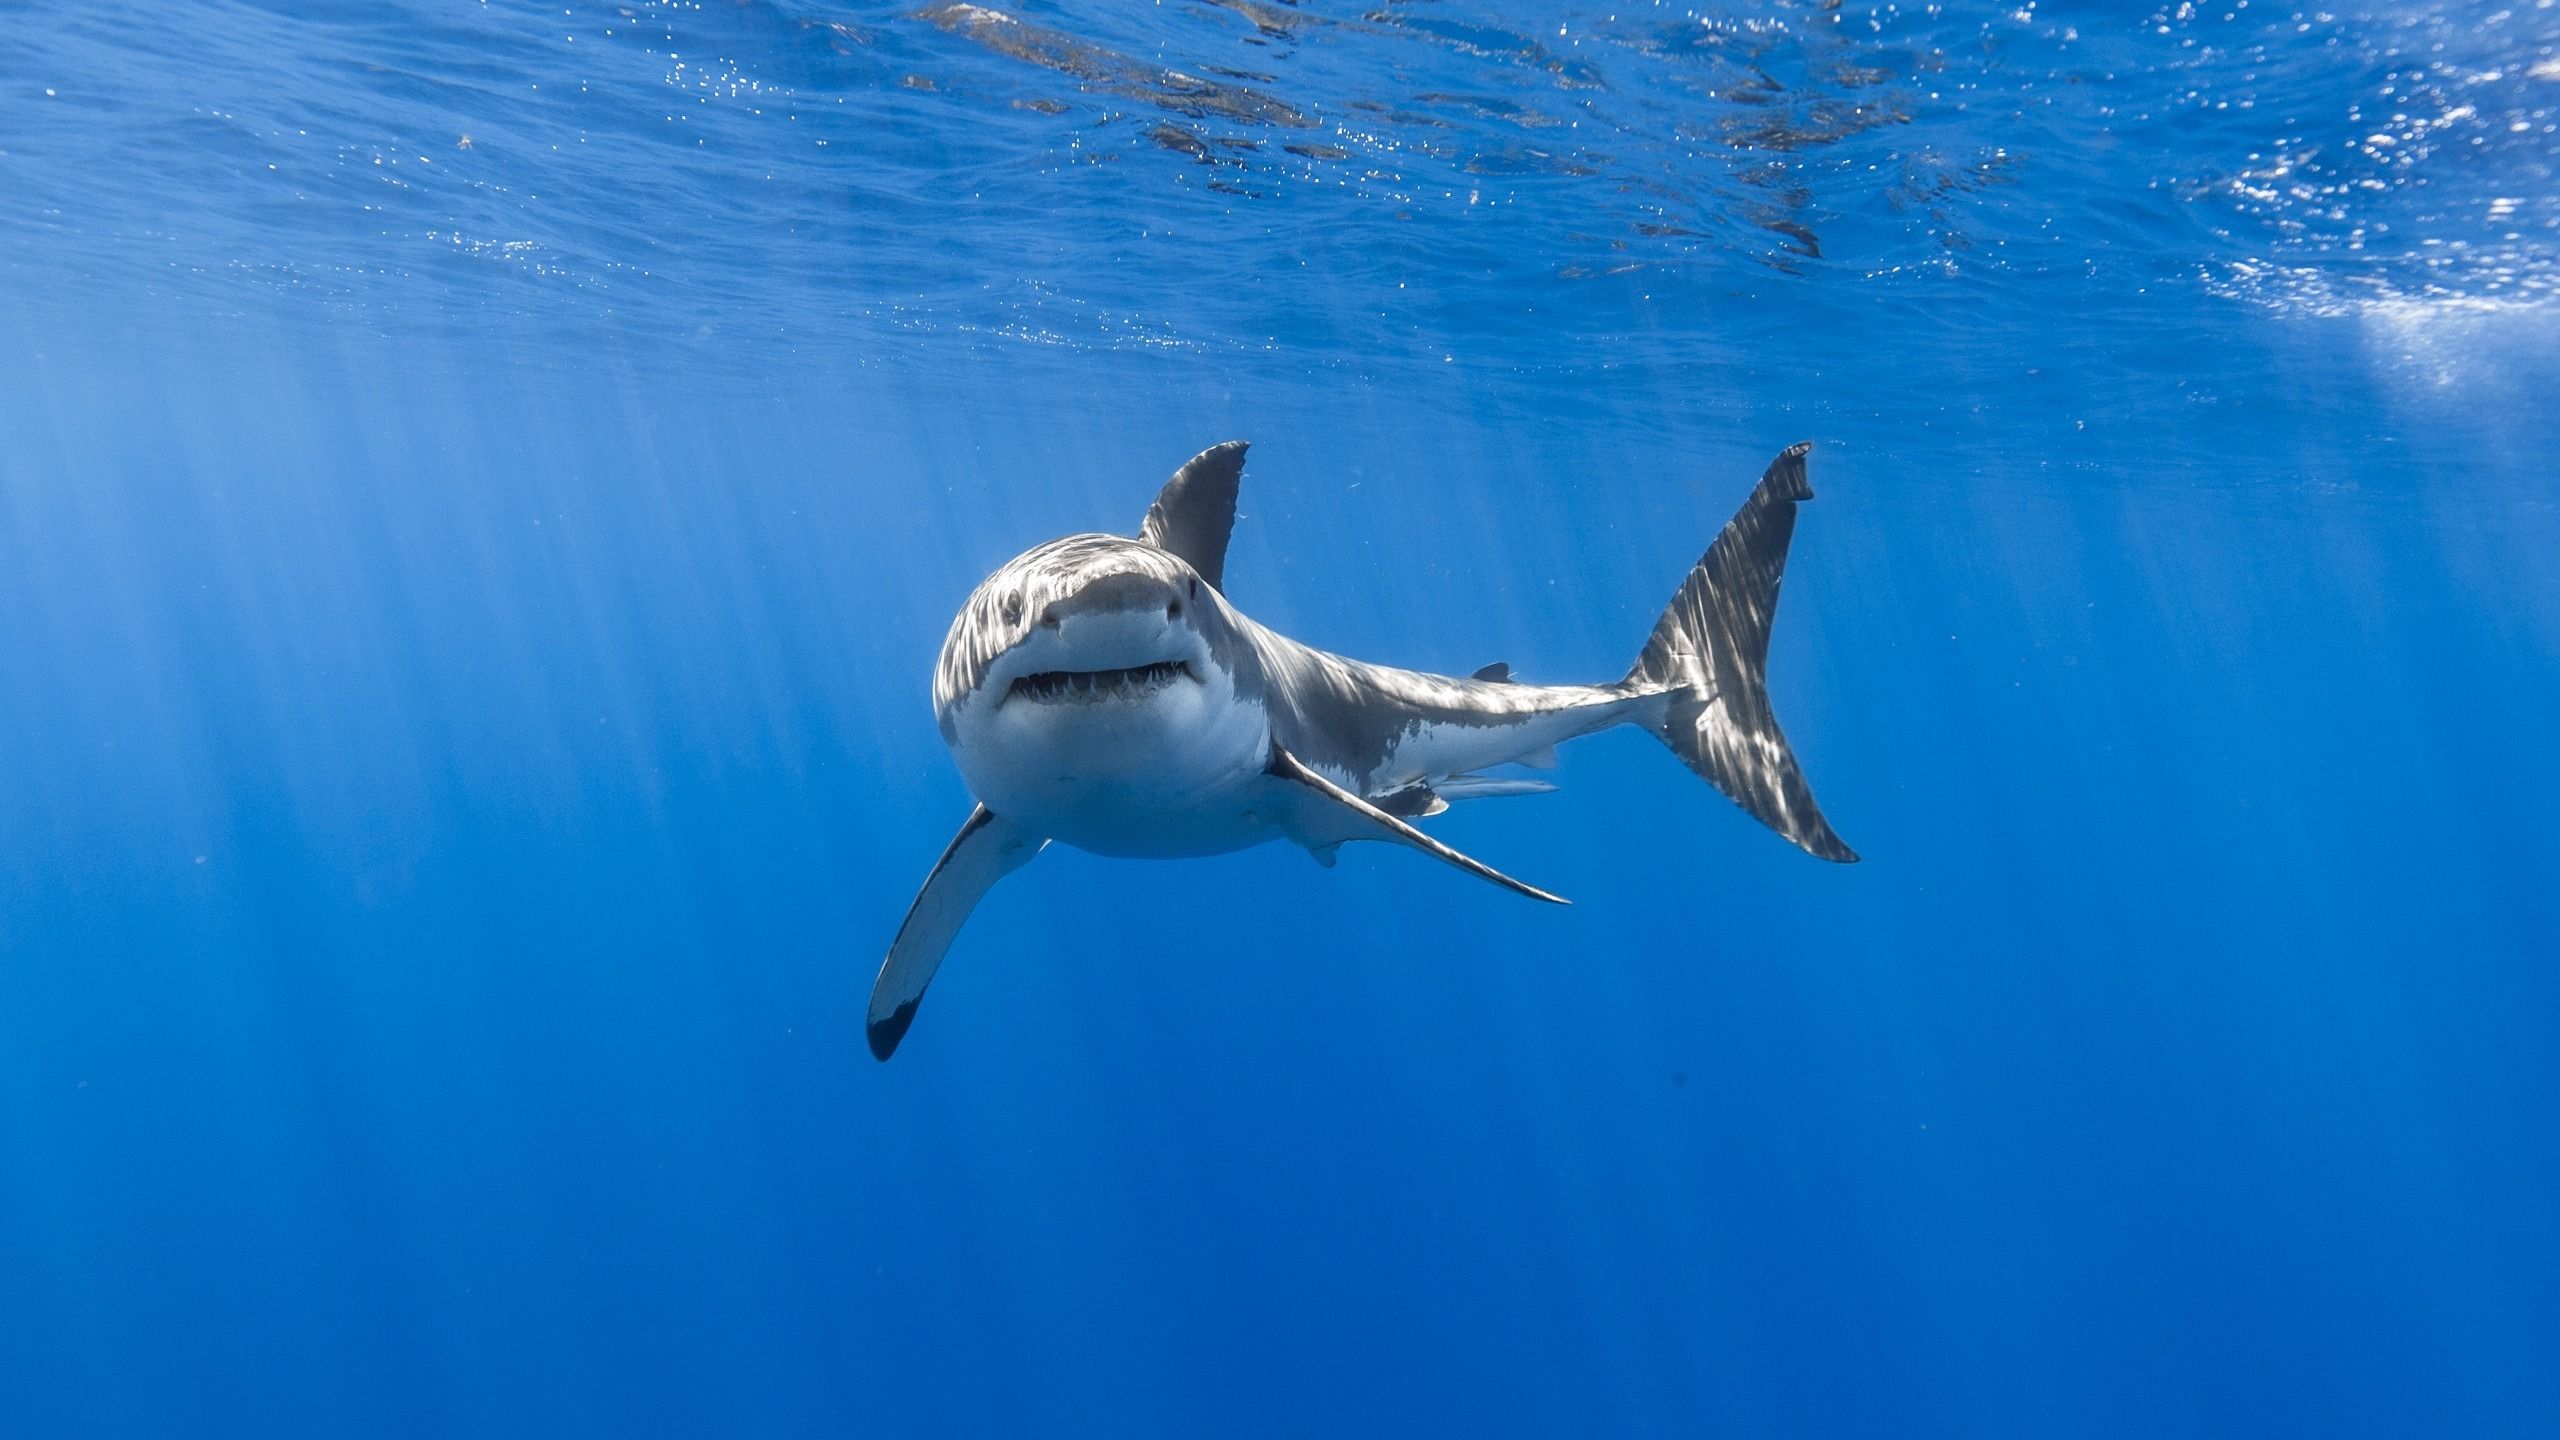 Download 2560x1440 wallpaper great, white shark, fish, underwater, dual wide, widescreen 16: widescreen, 2560x1440 HD image, background, 2457